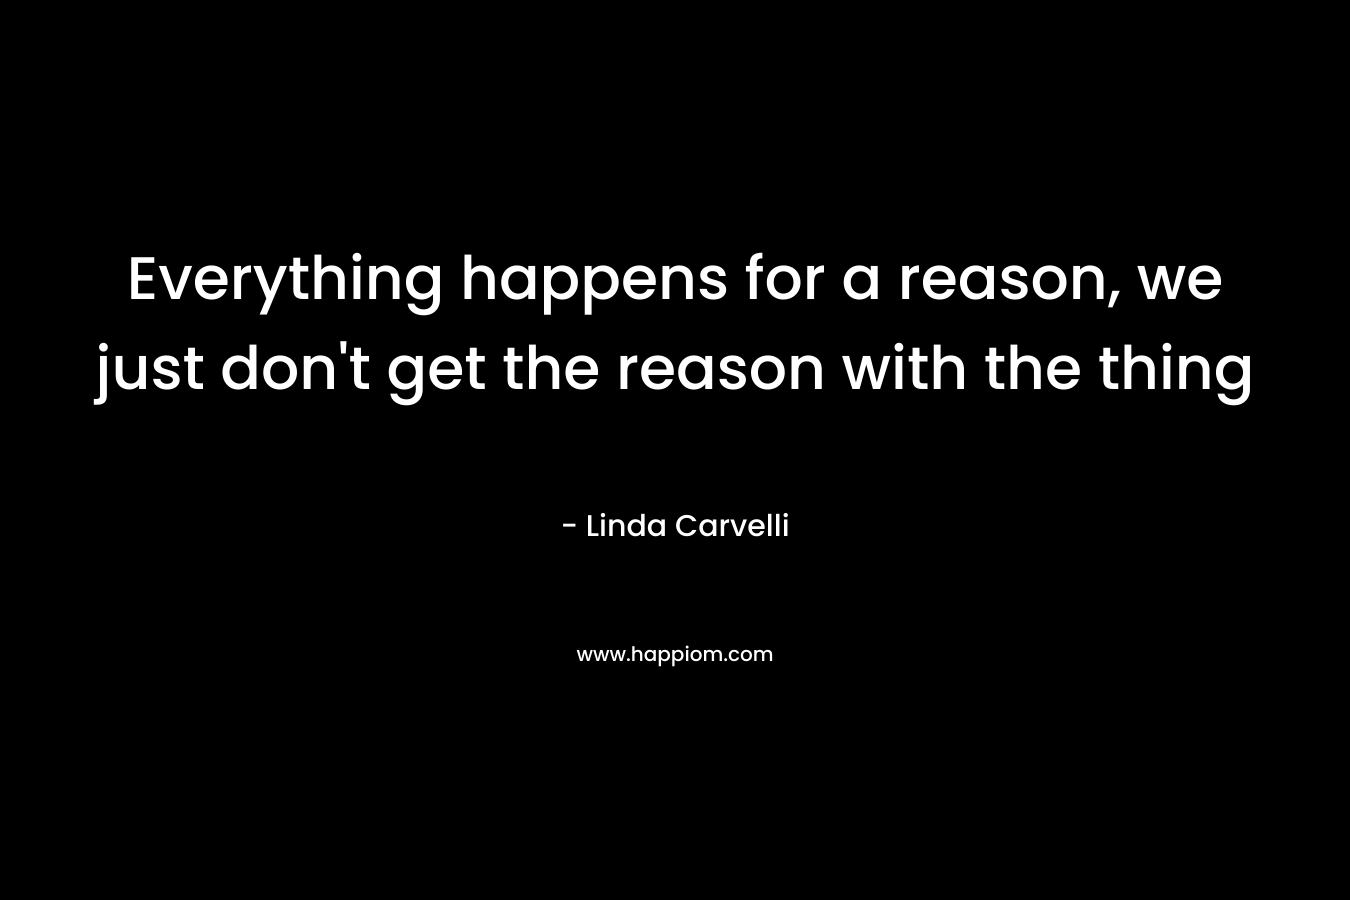 Everything happens for a reason, we just don't get the reason with the thing